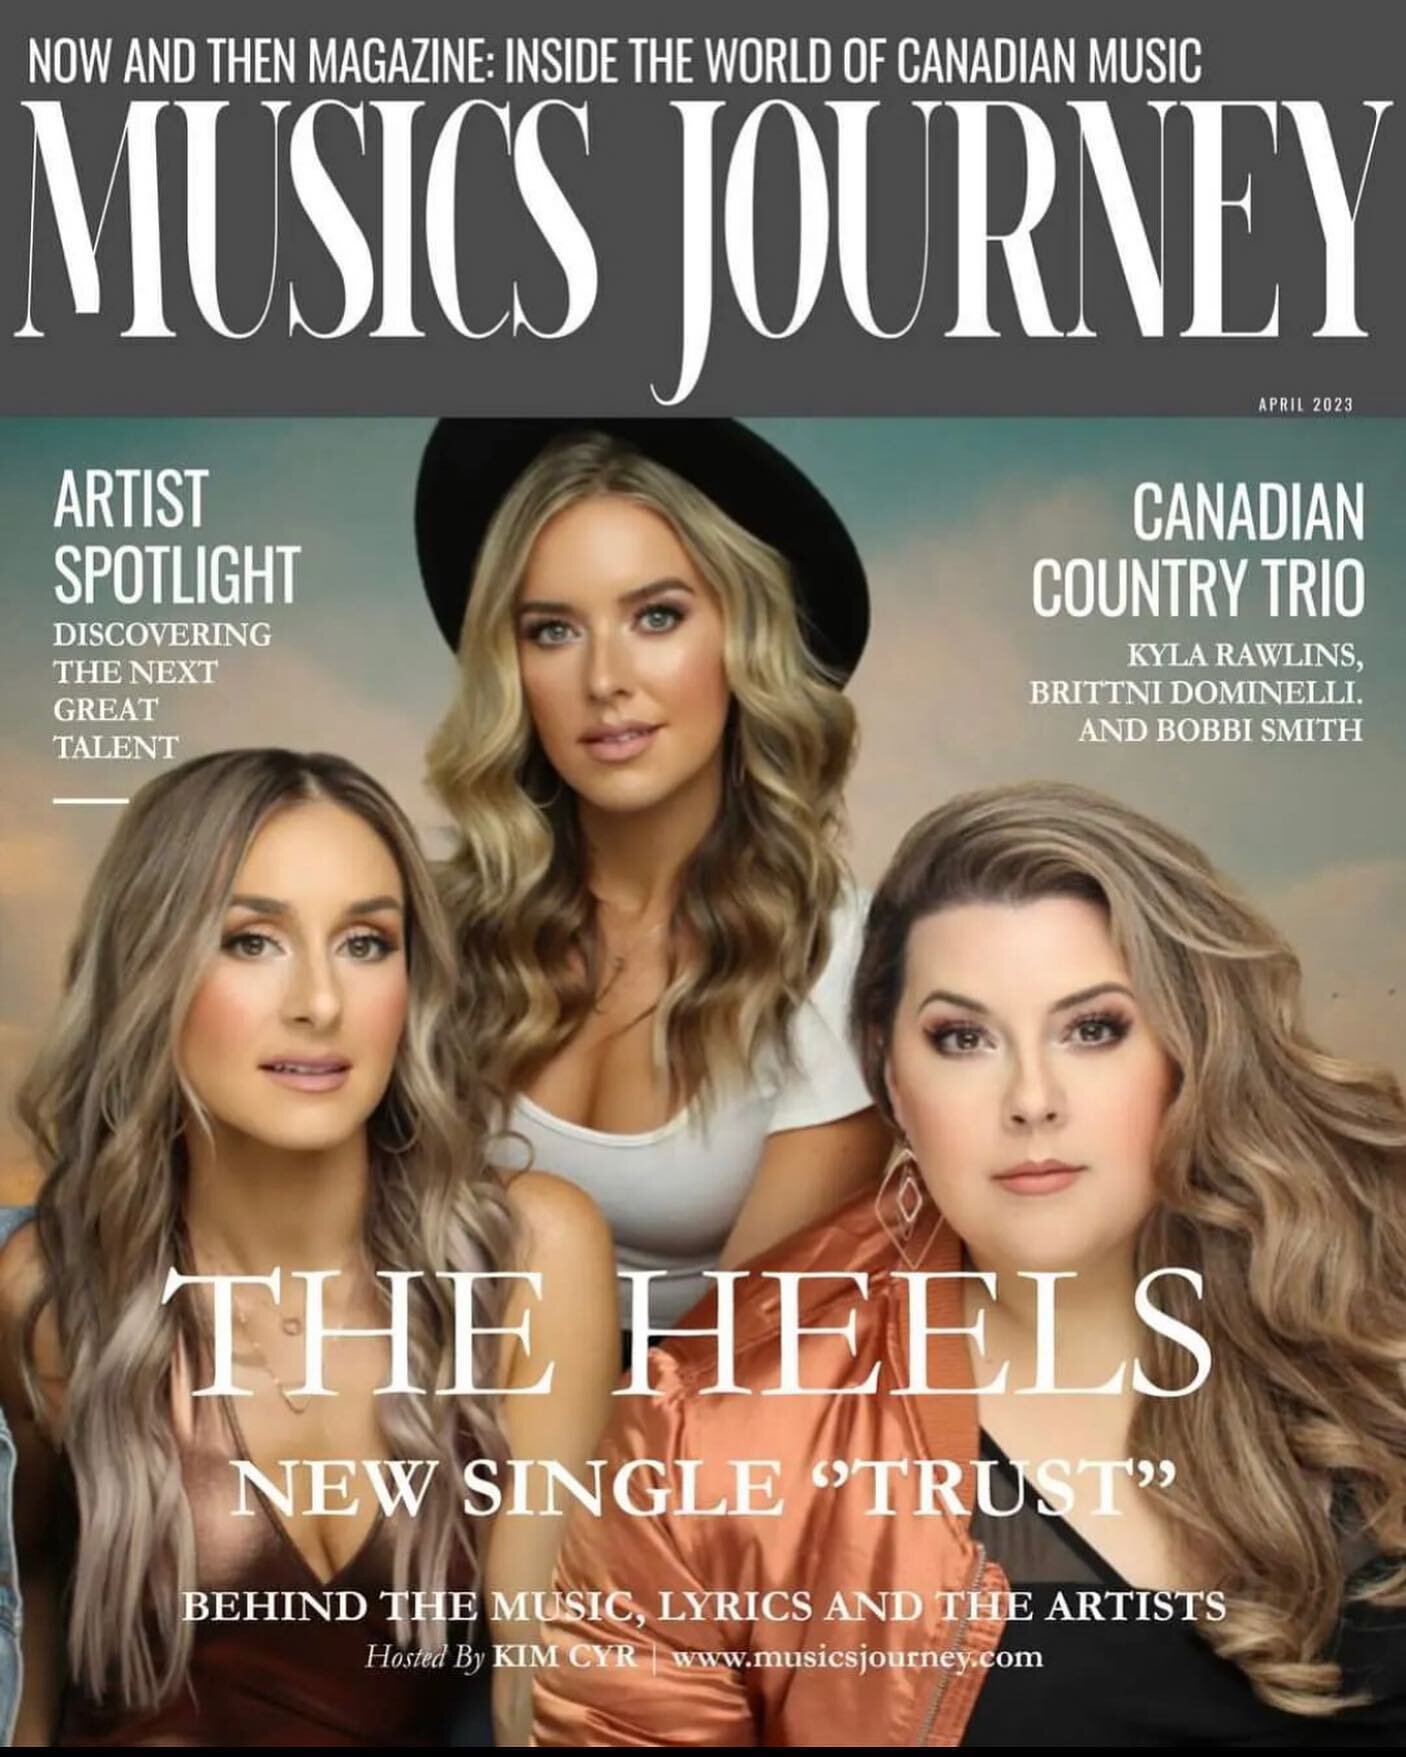 A big hug and thank you to @nowandthenmagazine Kim Cyr our dear friend who we have yet to meet but someday we will! Thank you for featuring us and our new music and on @musicsjourneypodcast we really appreciate your continued support. Chatting with y